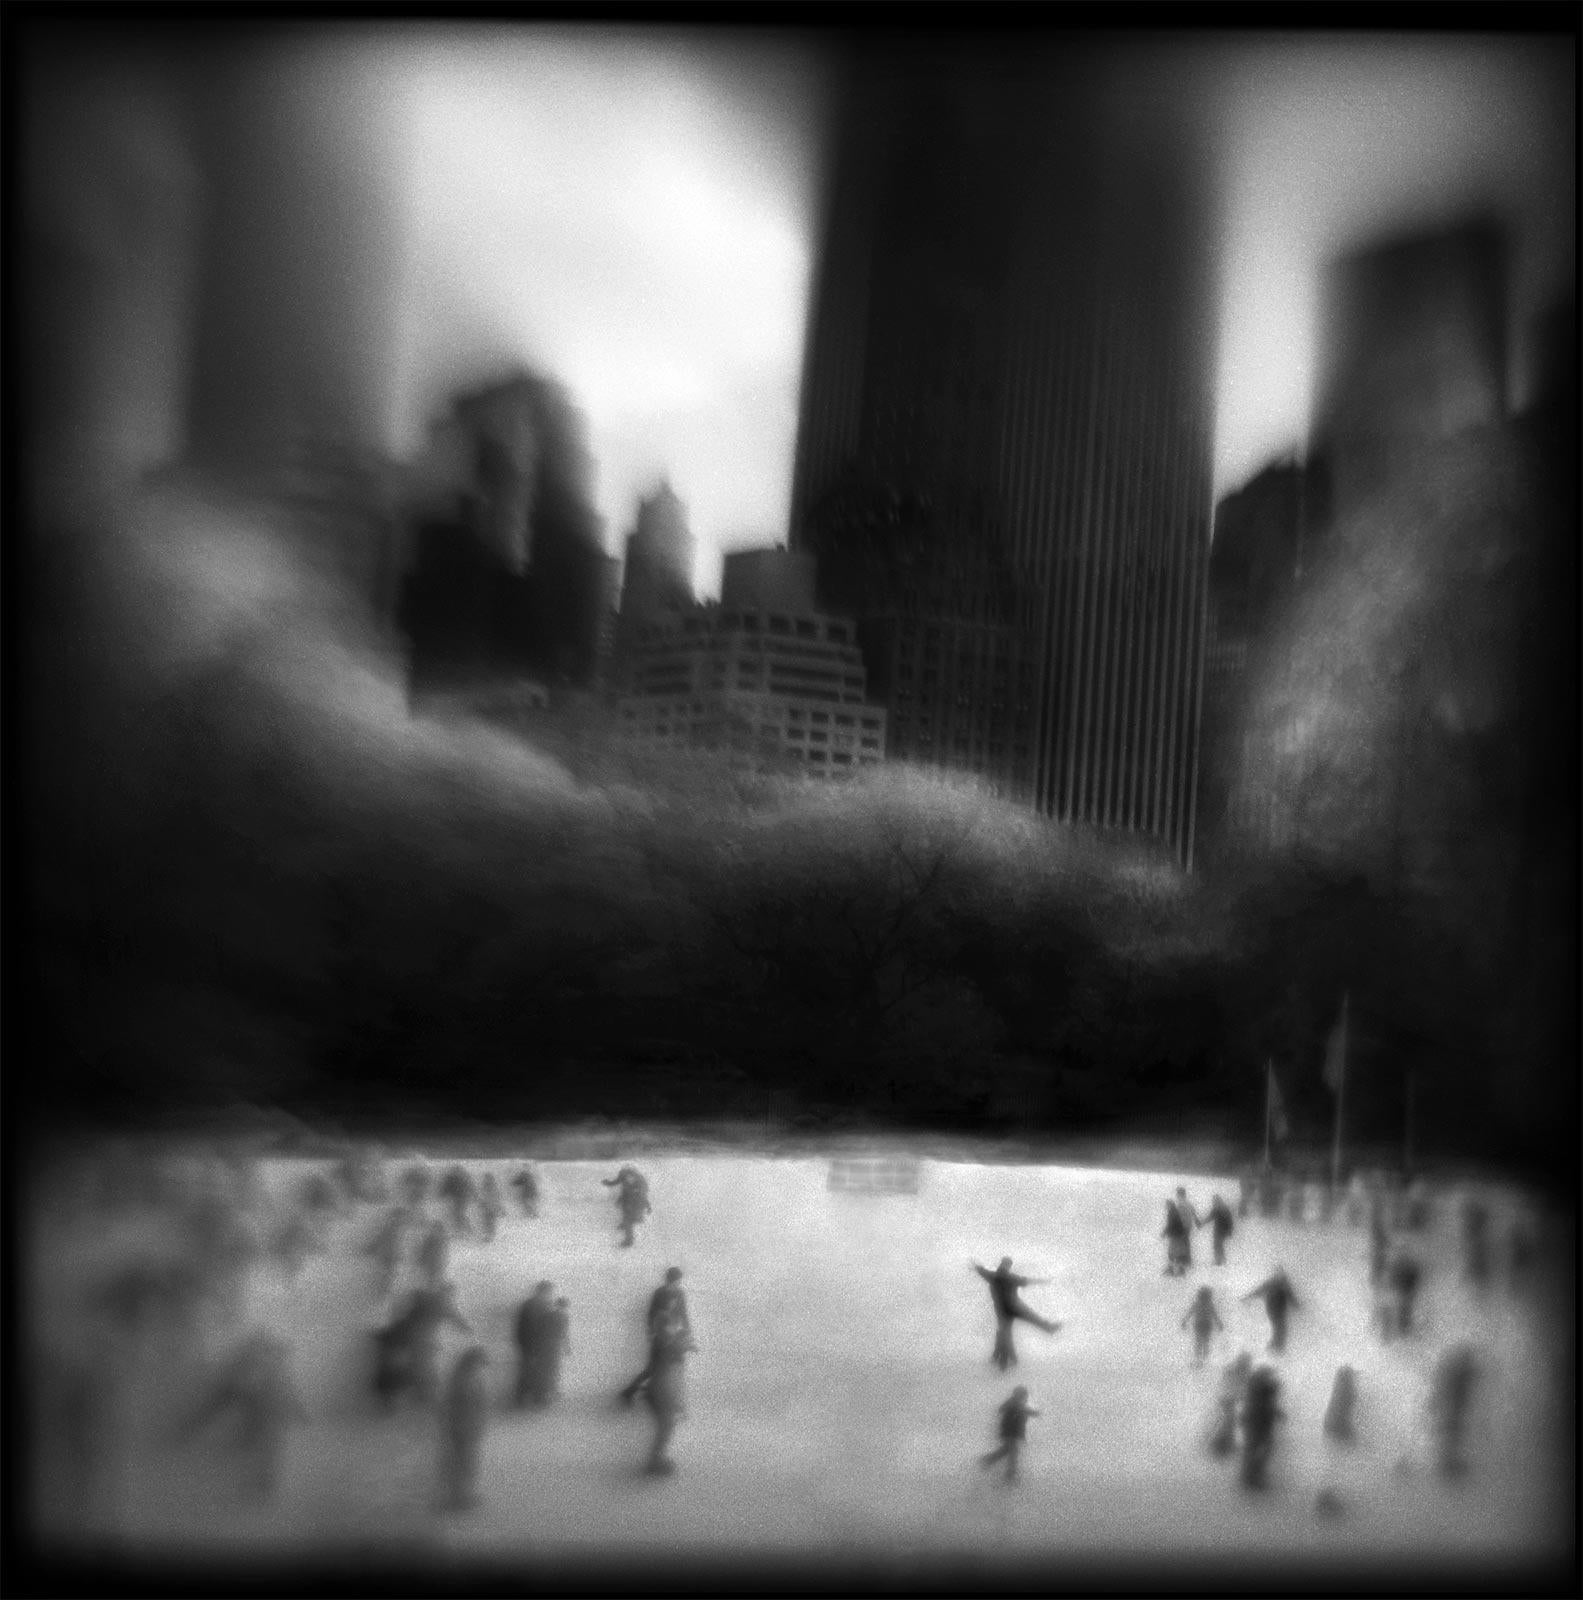 Susan Burnstine, In the Midst, 2008, (New York City), archival pigment ink print. Susan Burnstine portrays her dream-like visions entirely in-camera, rather than with post-processing manipulations. To achieve this, she created twenty-one hand-made